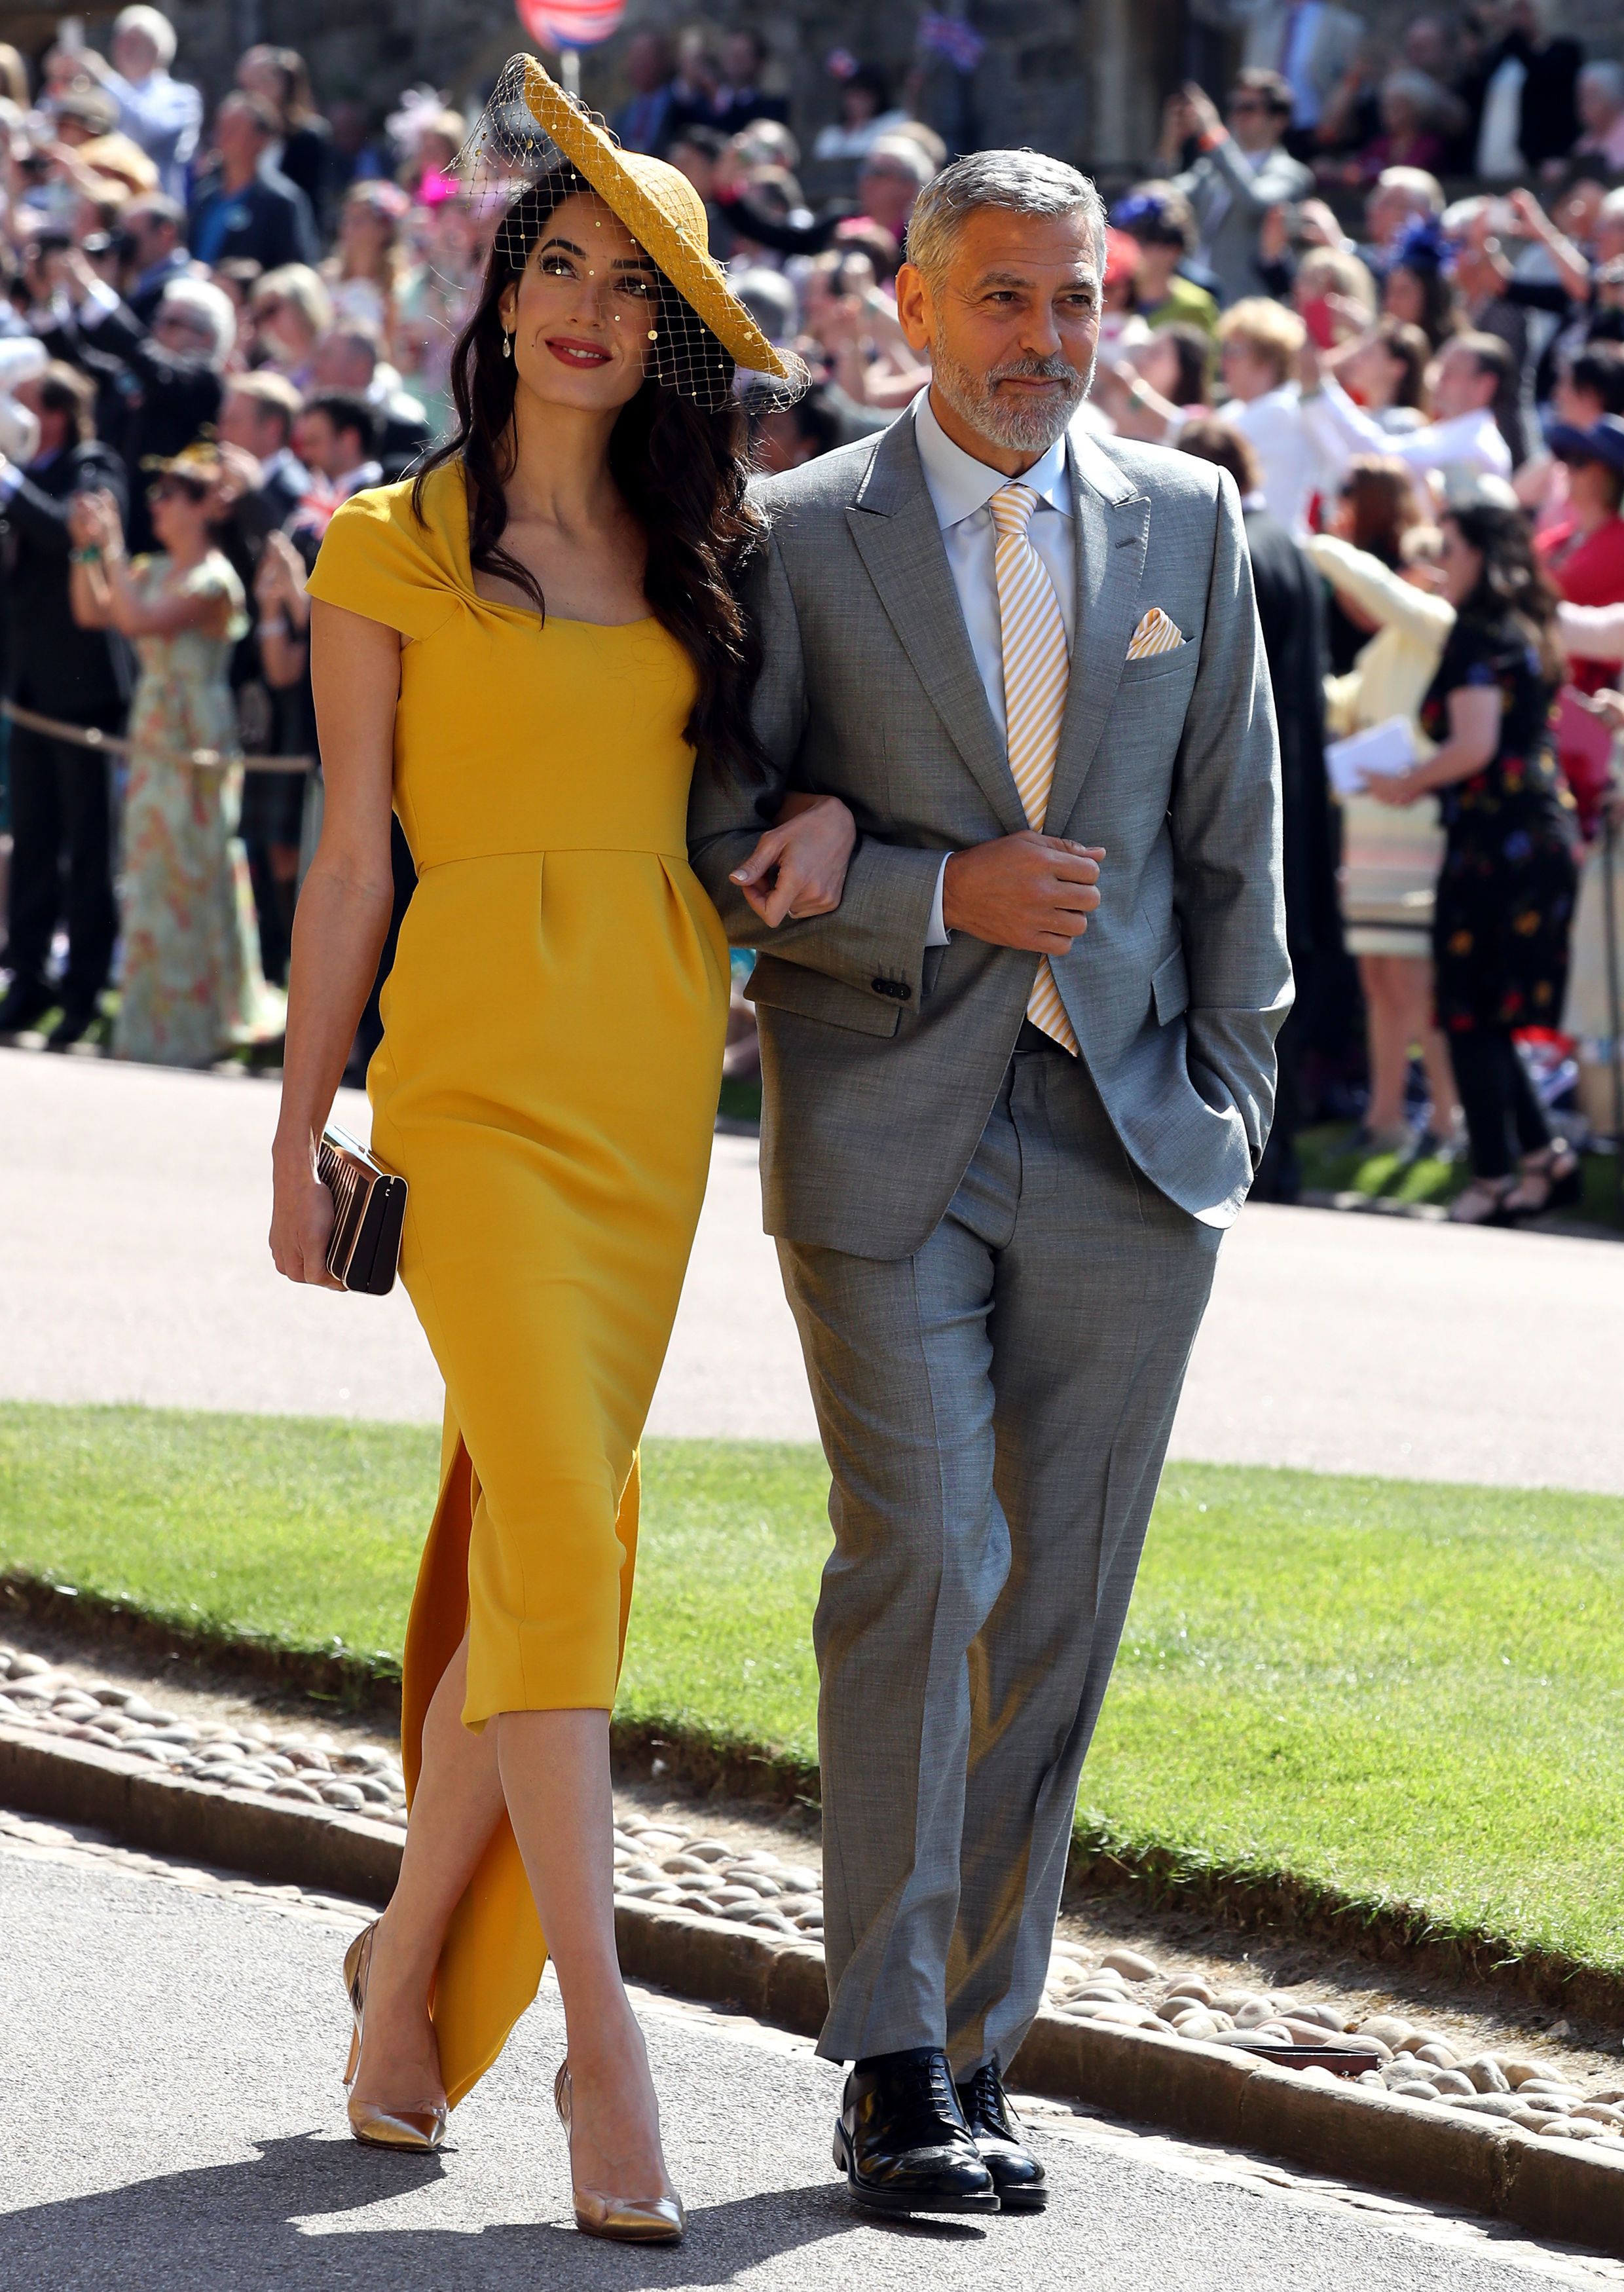 Amal Clooney's Dress Was Most-Searched Look From Royal Wedding